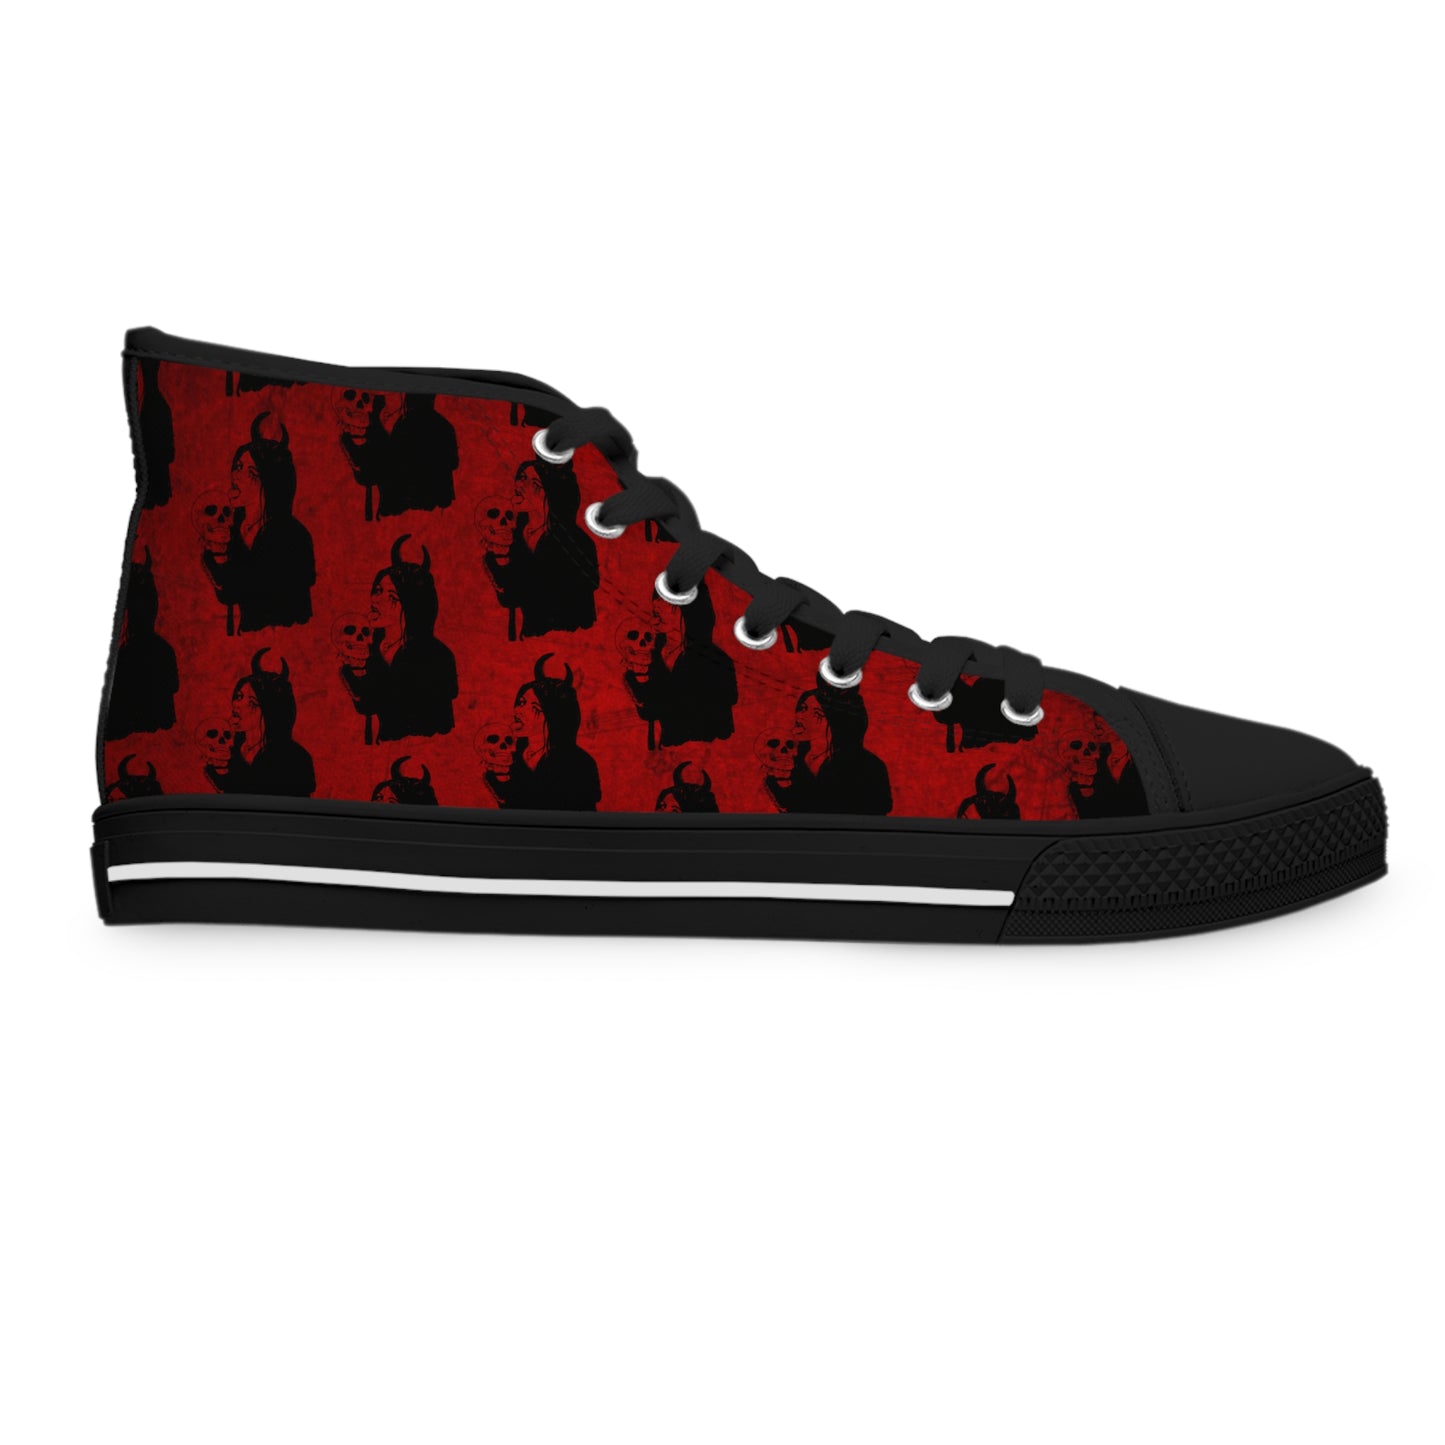 Red Goth Sneakers With Skull Print